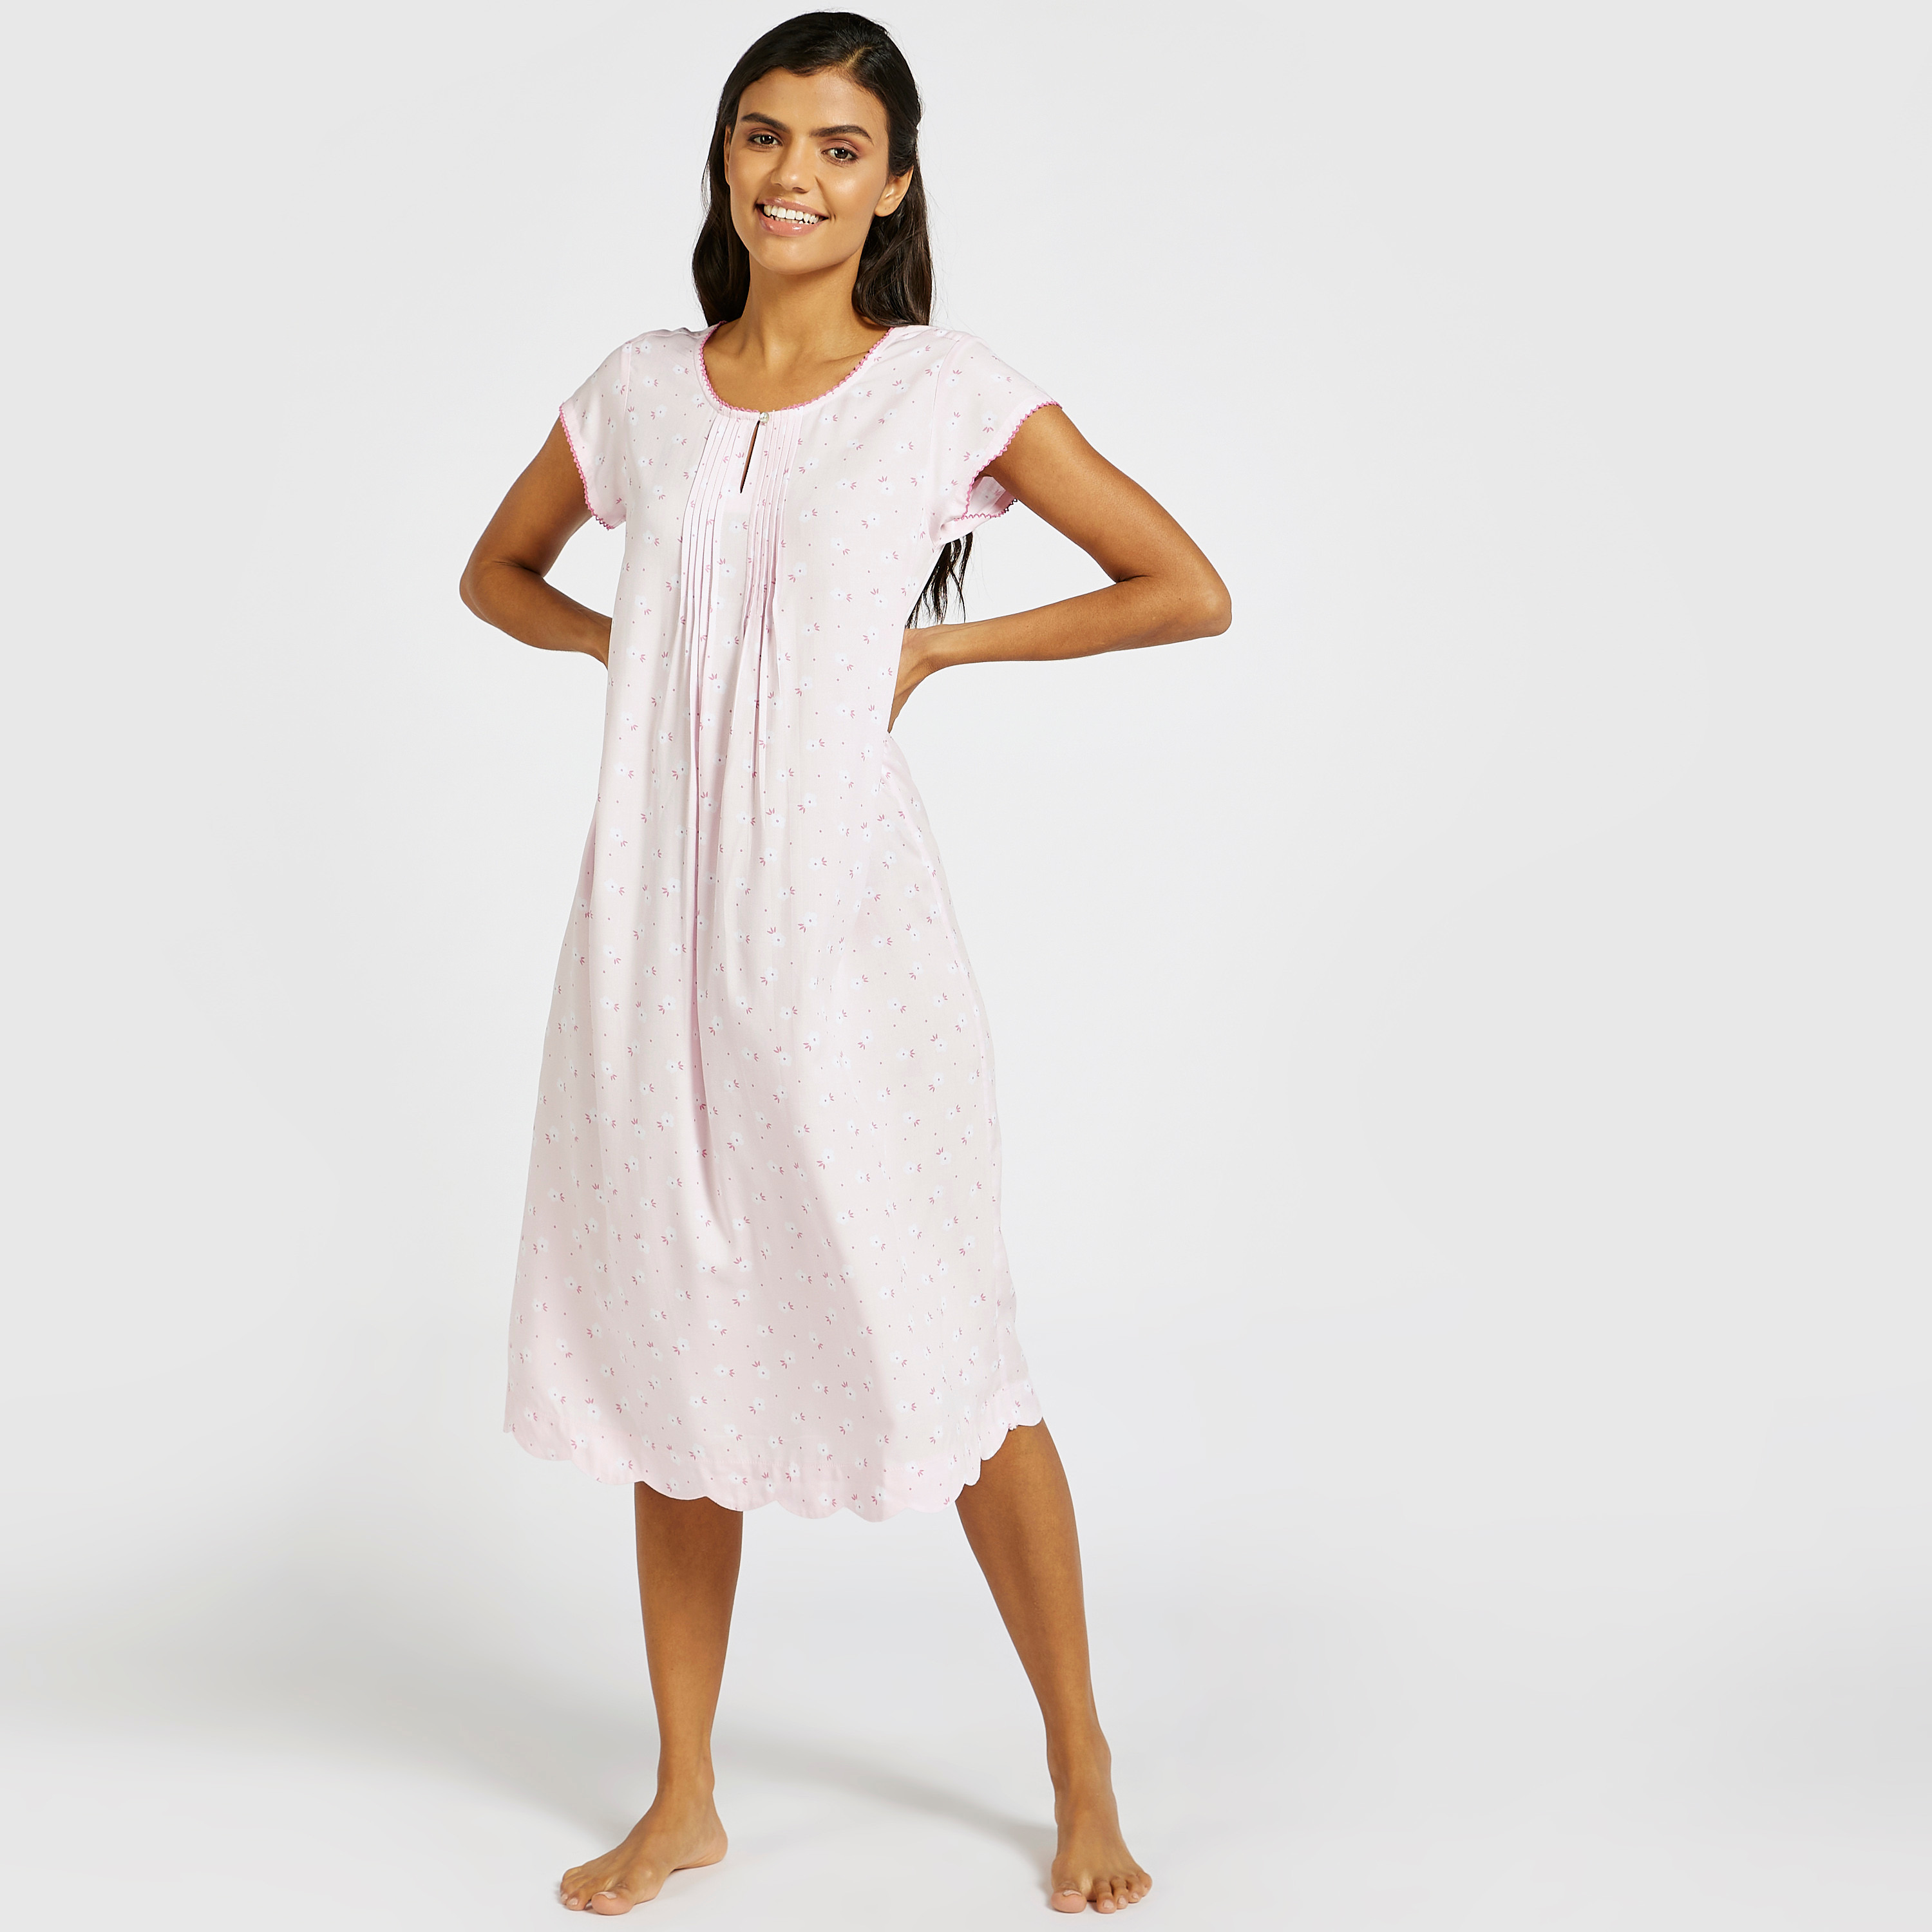 Shop Floral Printed Sleep Gown with Round Neck and Short Sleeves Online |  Max Qatar